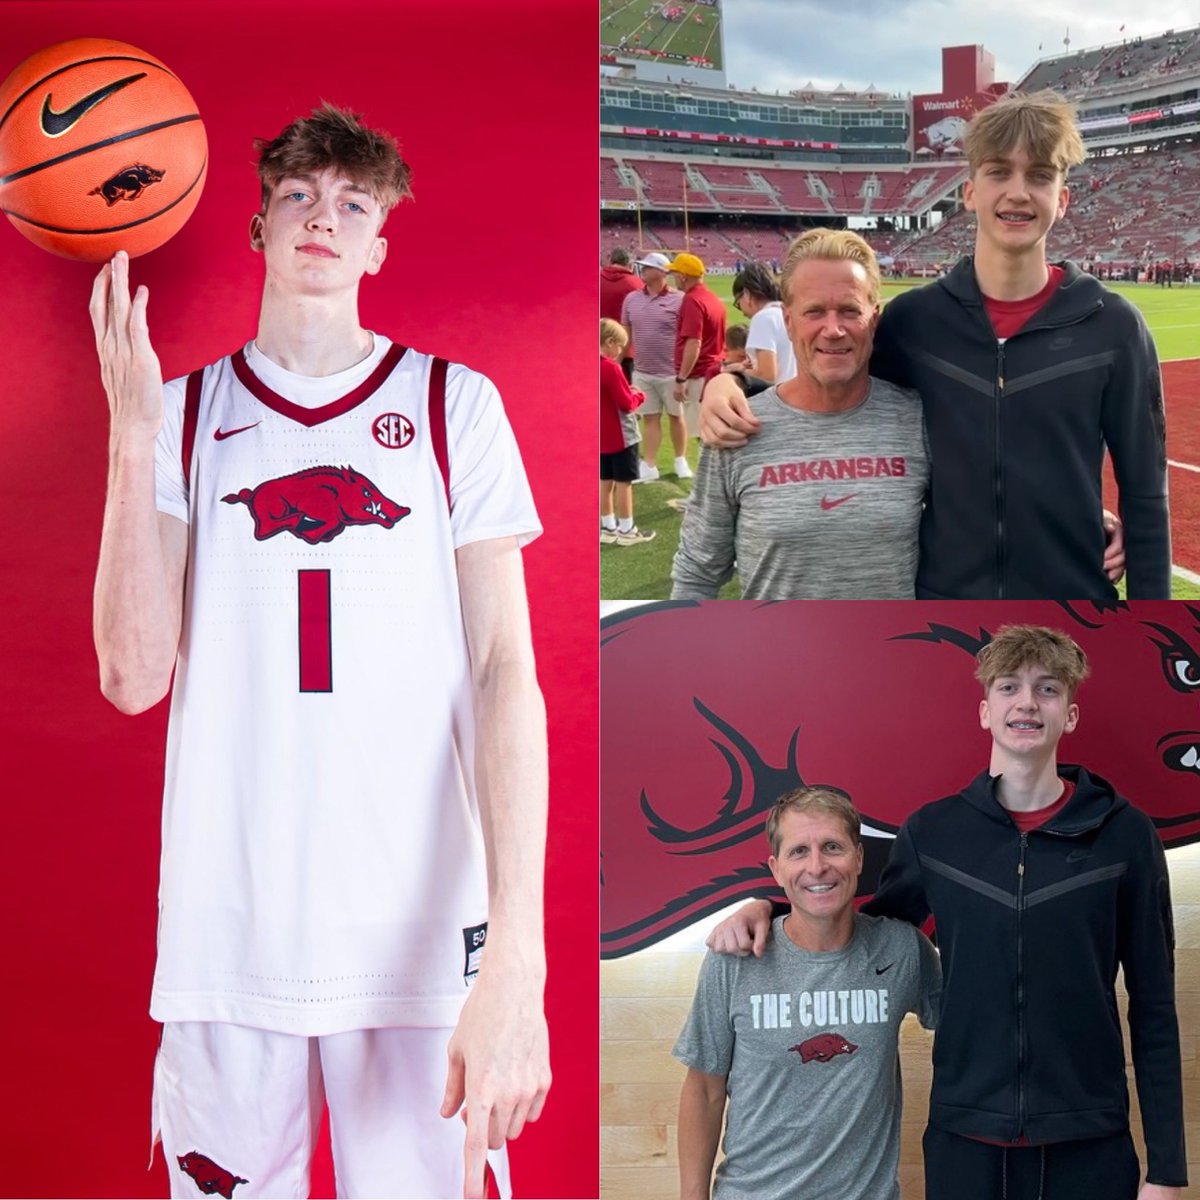 BREAKING: Arkansas has offered a scholarship to 2026 Nat'l No. 29 / 4-star Aidan Chronister @AidanChronist1 (6-7 wing, Rogers, 17U AAO Flight) ... FREE article @ Hogville: forums.hogville.net/index.php?topi…